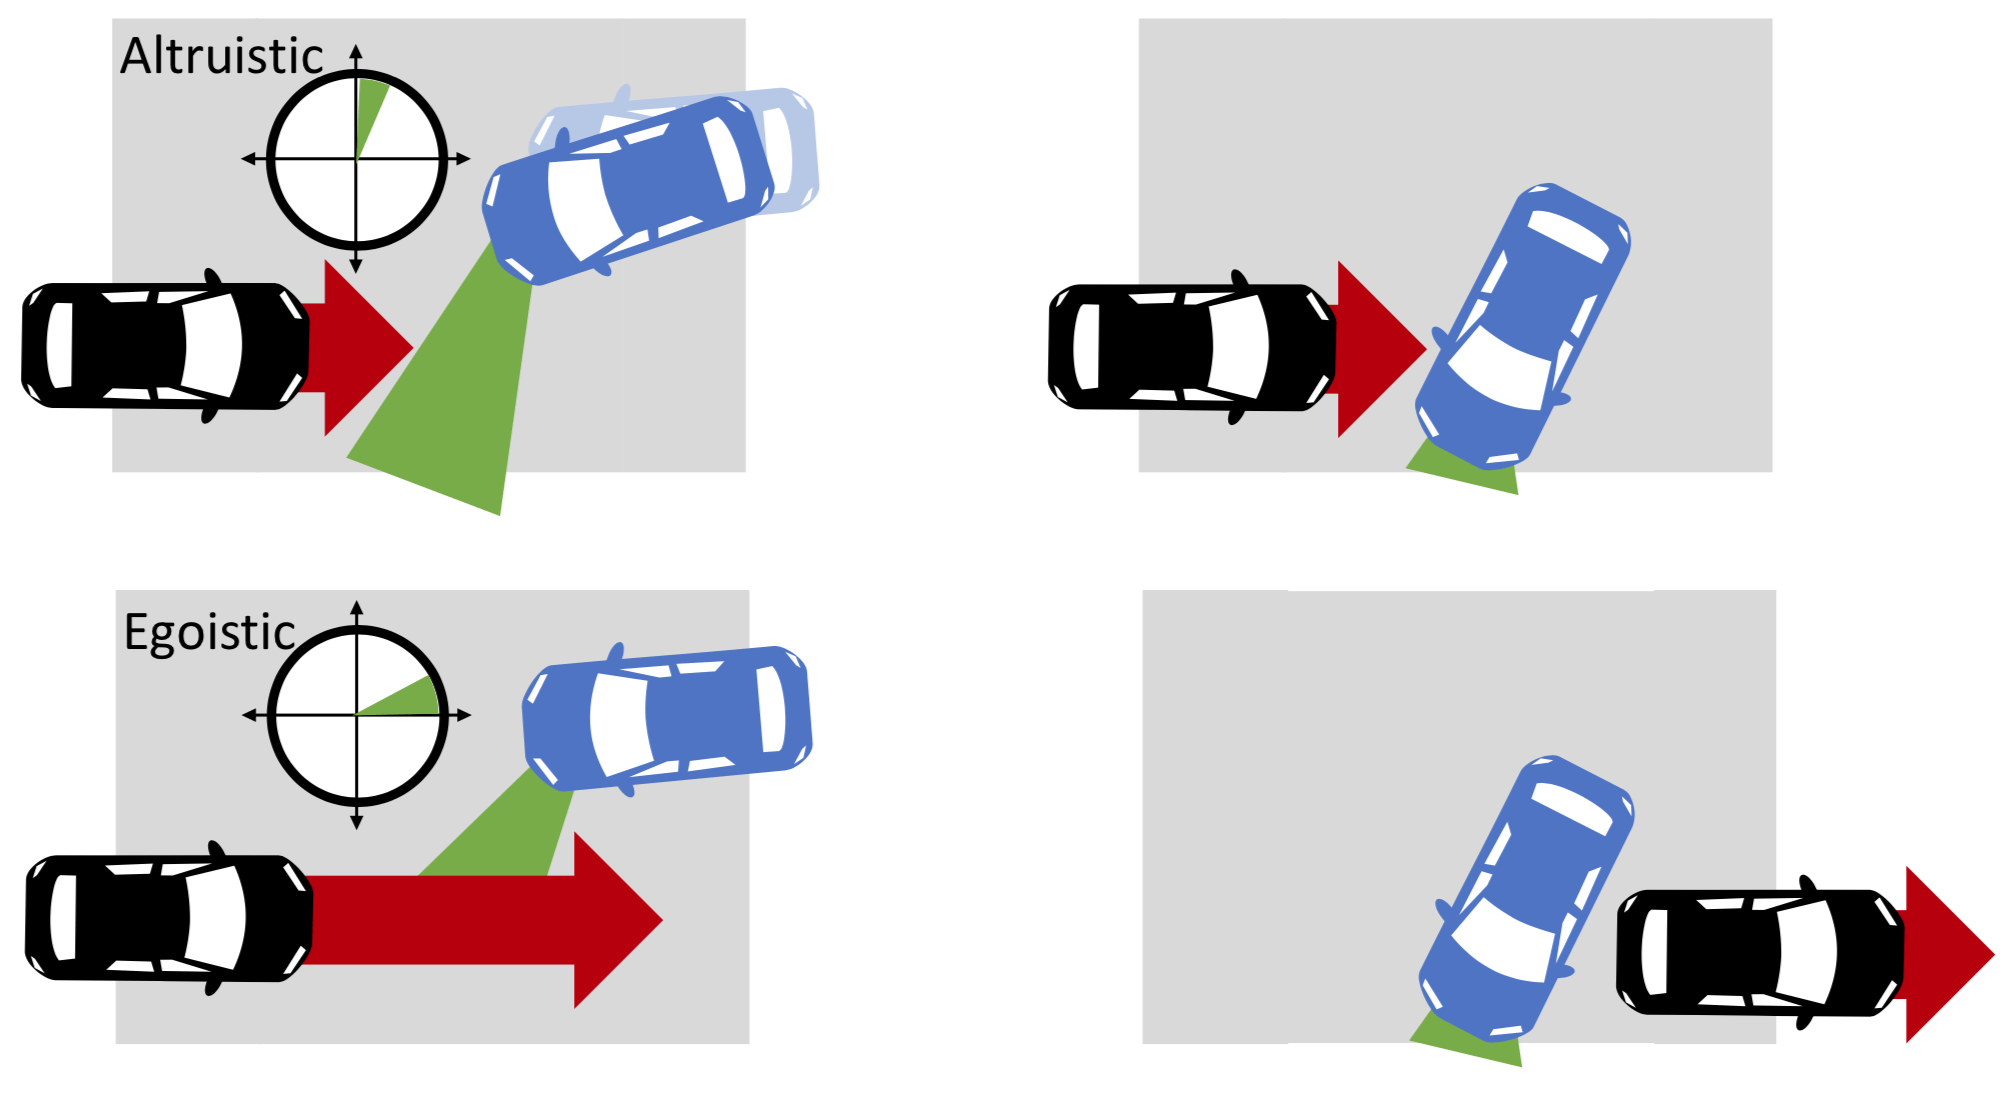 3Cars allowing left-hand turns - altruistic vs. egoistic (image credit MIT CSAIL)